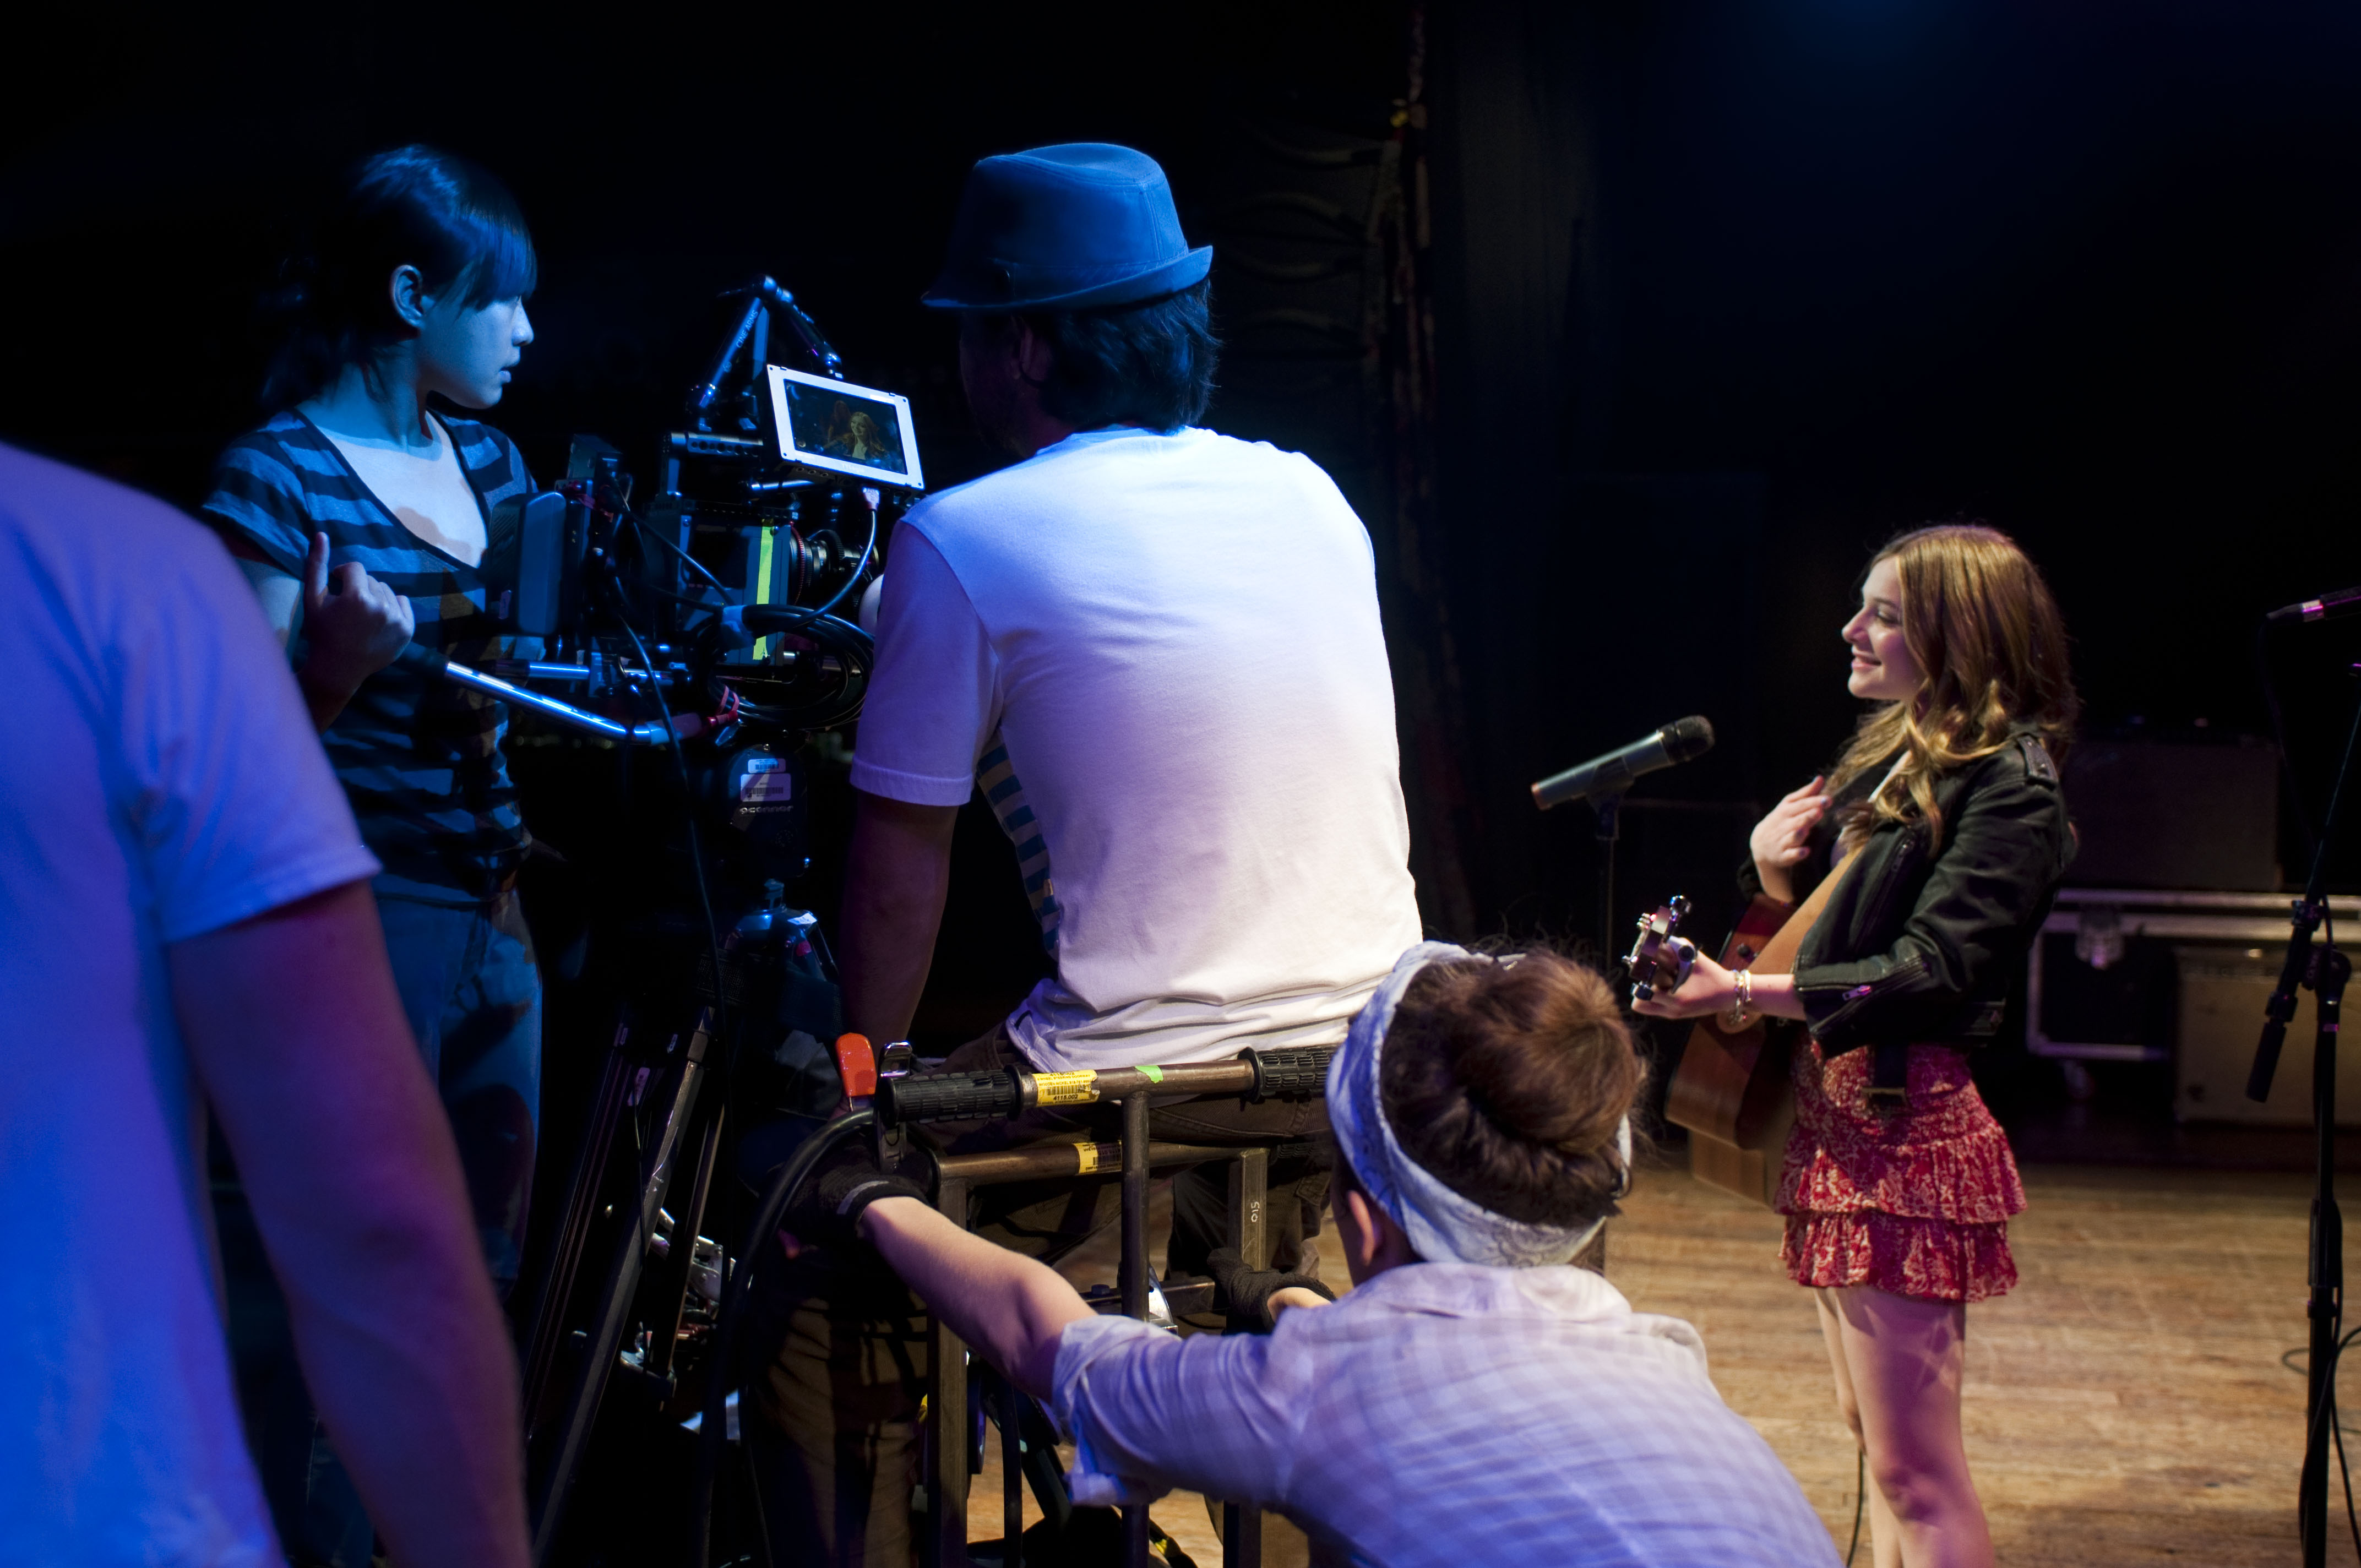 Jami Belushi on the set of her music video for 